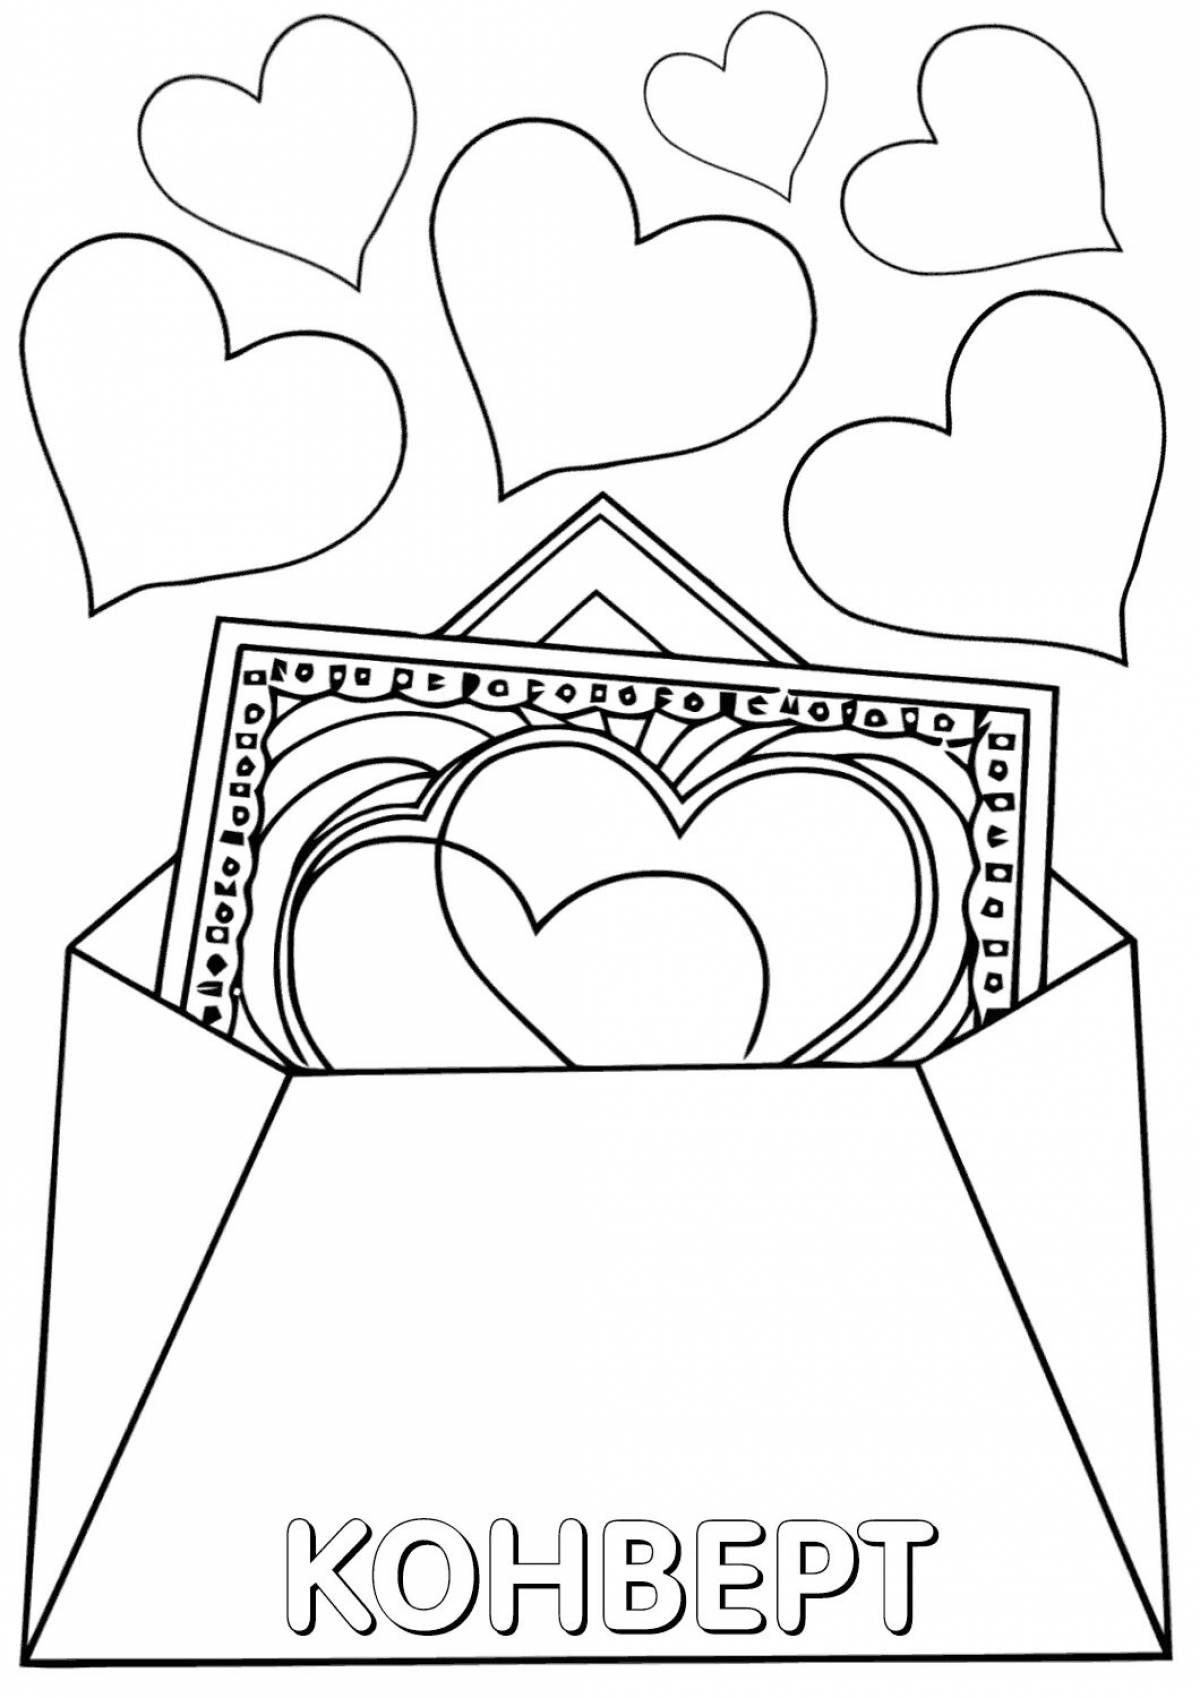 Cozy envelope template coloring page